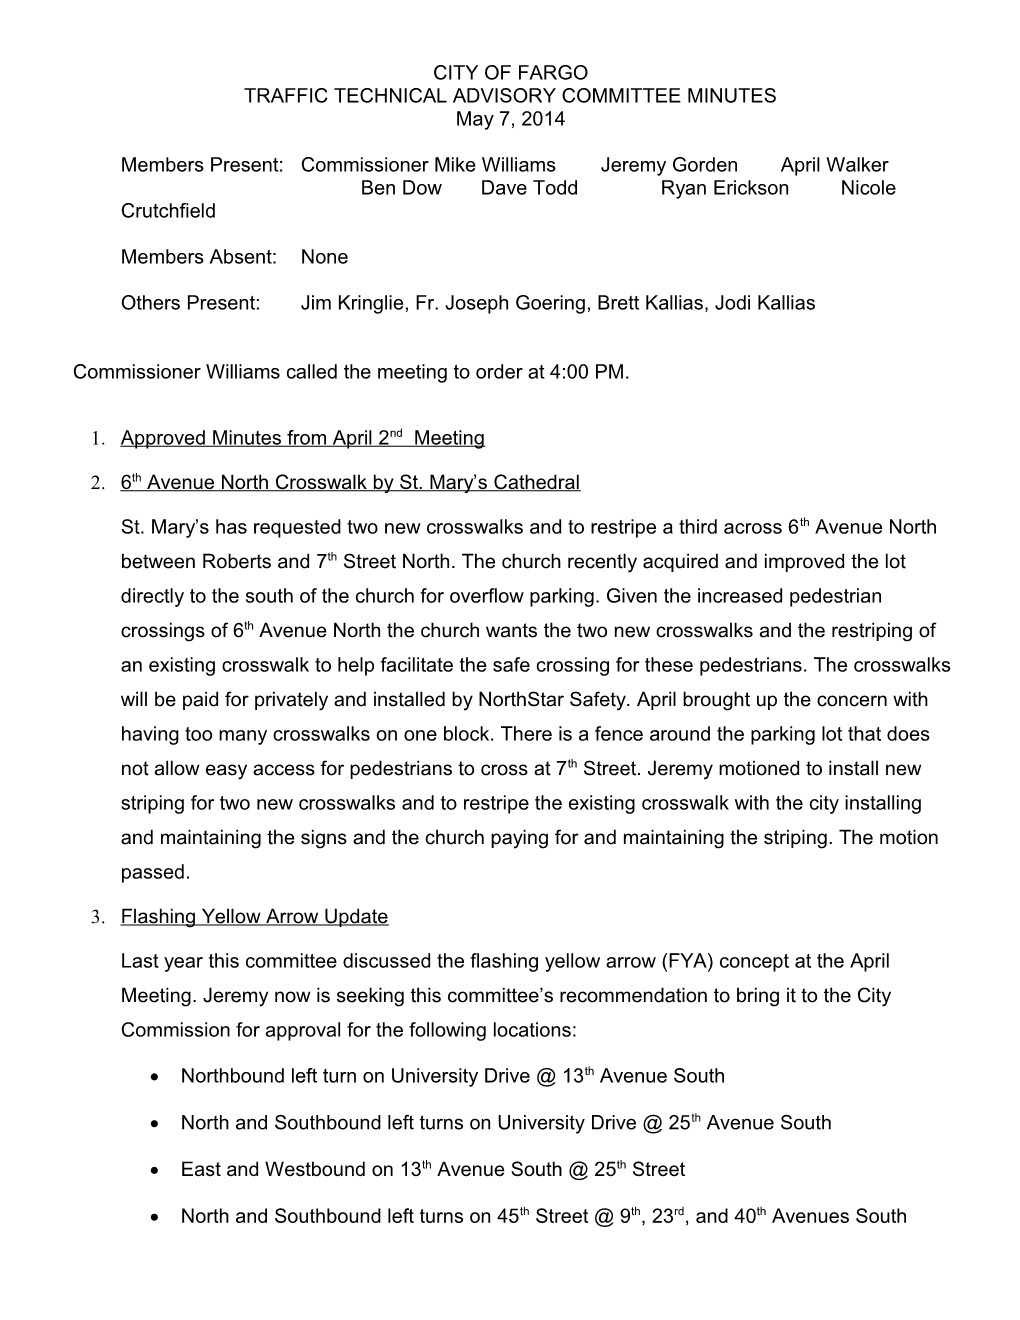 Traffic Technical Advisory Committee Minutes